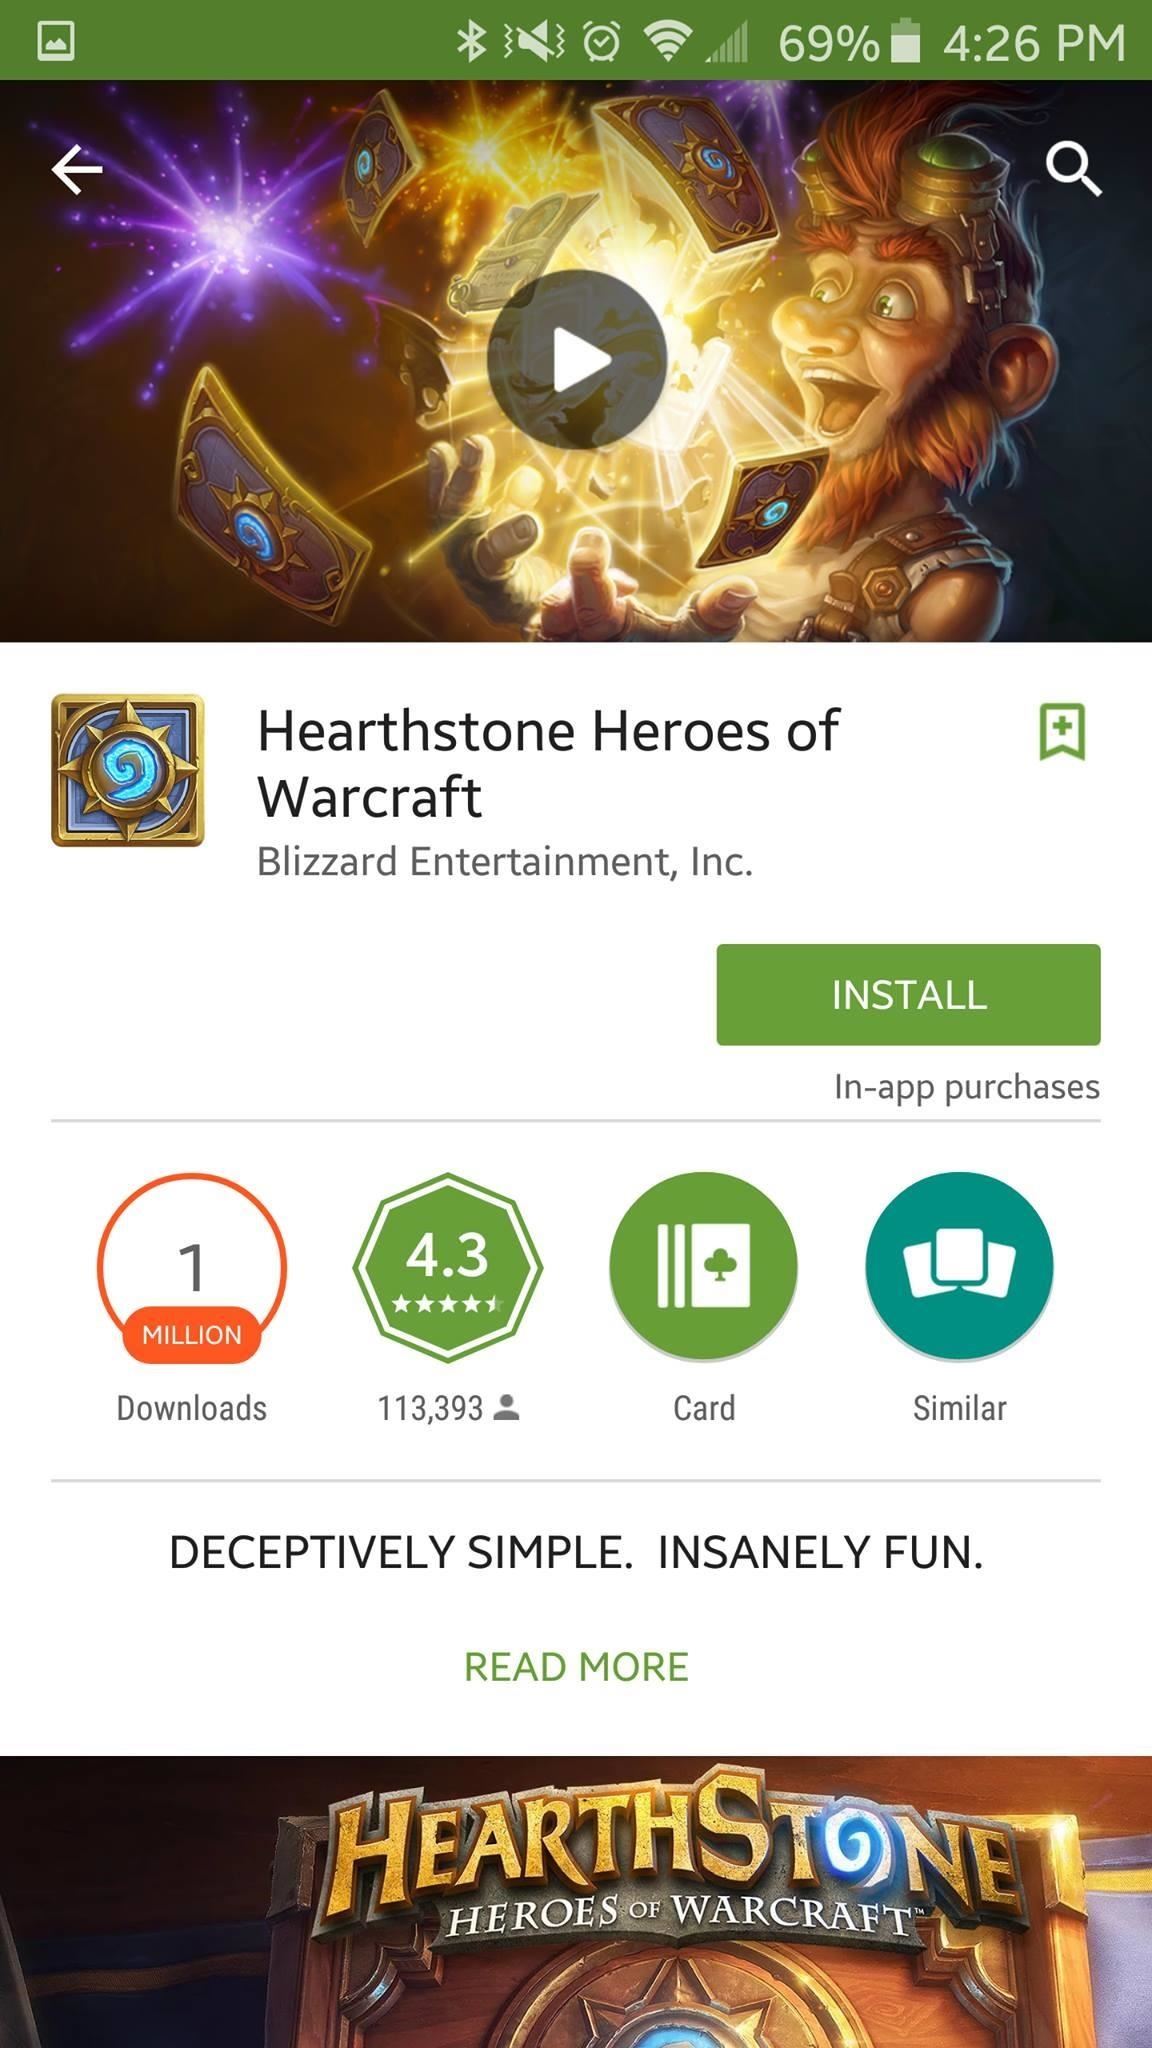 How to Bypass Restrictions to Install Hearthstone on Any Android Device